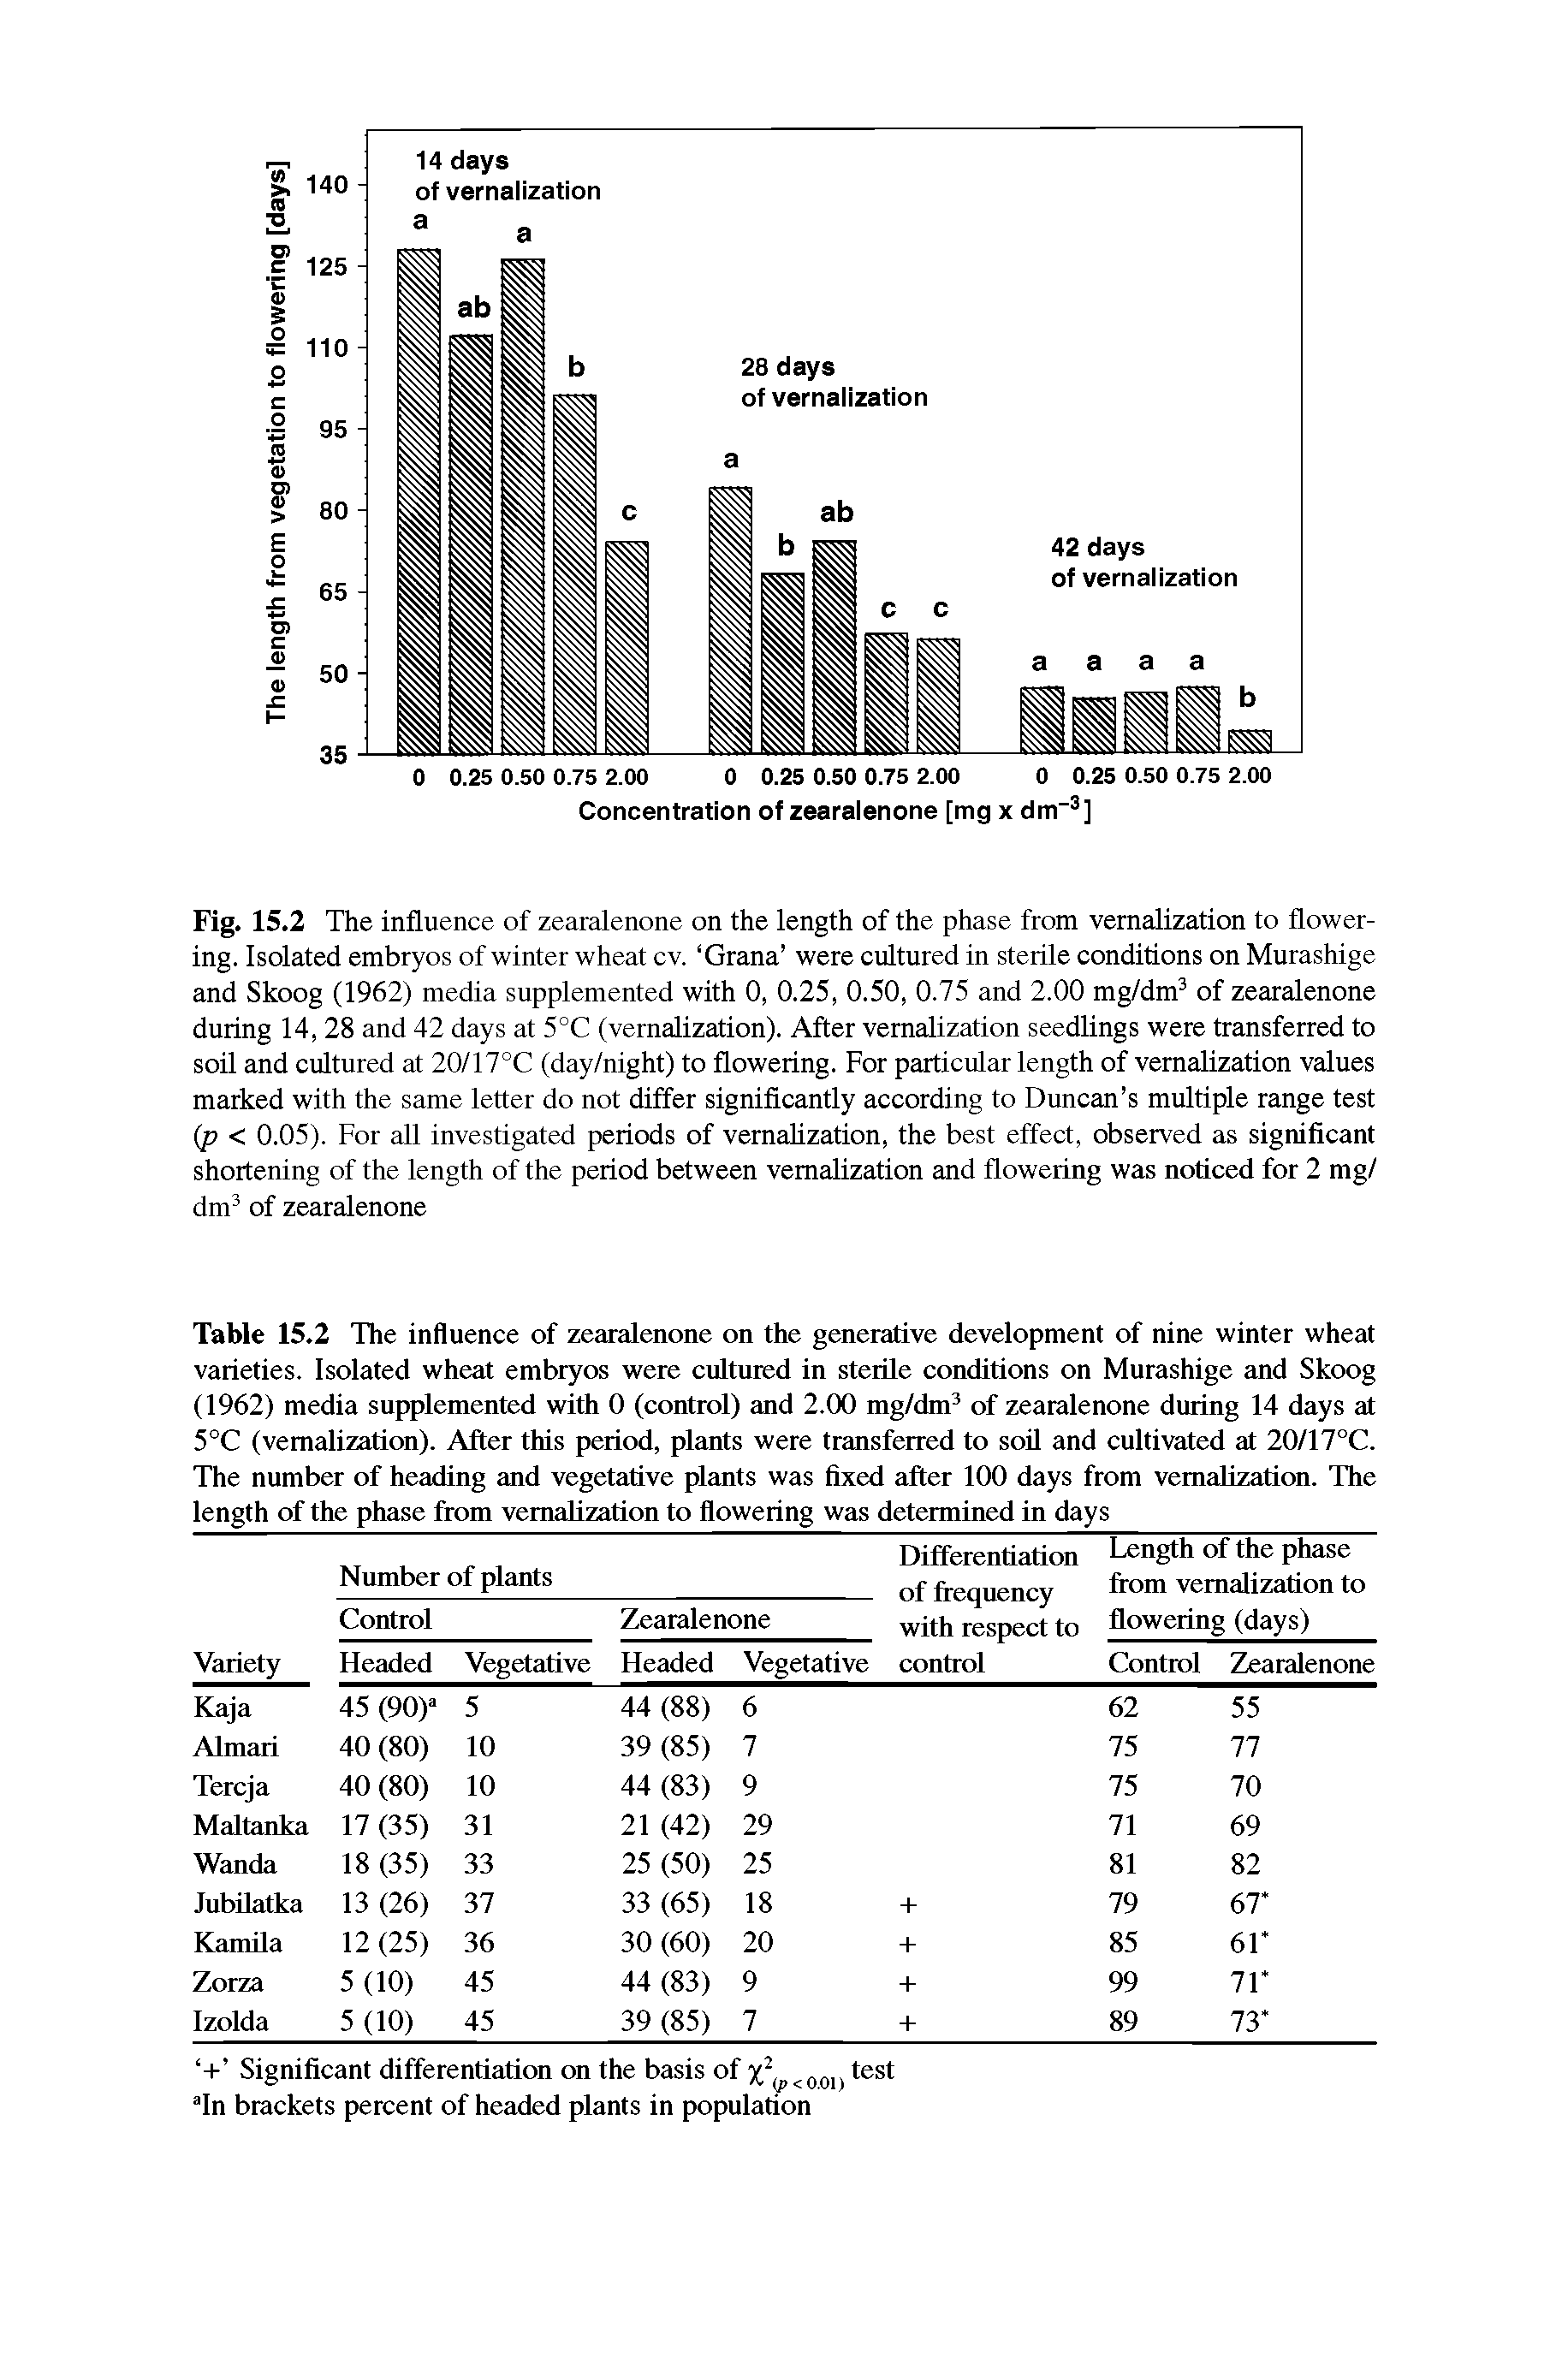 Table 15.2 The influence of zearalenone on the generative development of nine winter wheat varieties. Isolated wheat embryos were cultured in sterile conditions on Murashige and Skoog (1962) media supplemented with 0 (control) and 2.00 mg/dm3 of zearalenone during 14 days at 5°C (vernalization). After this period, plants were transferred to soil and cultivated at 20/17°C. The number of heading and vegetative plants was fixed after 100 days from vernalization. The length of the phase from vernalization to flowering was determined in days...